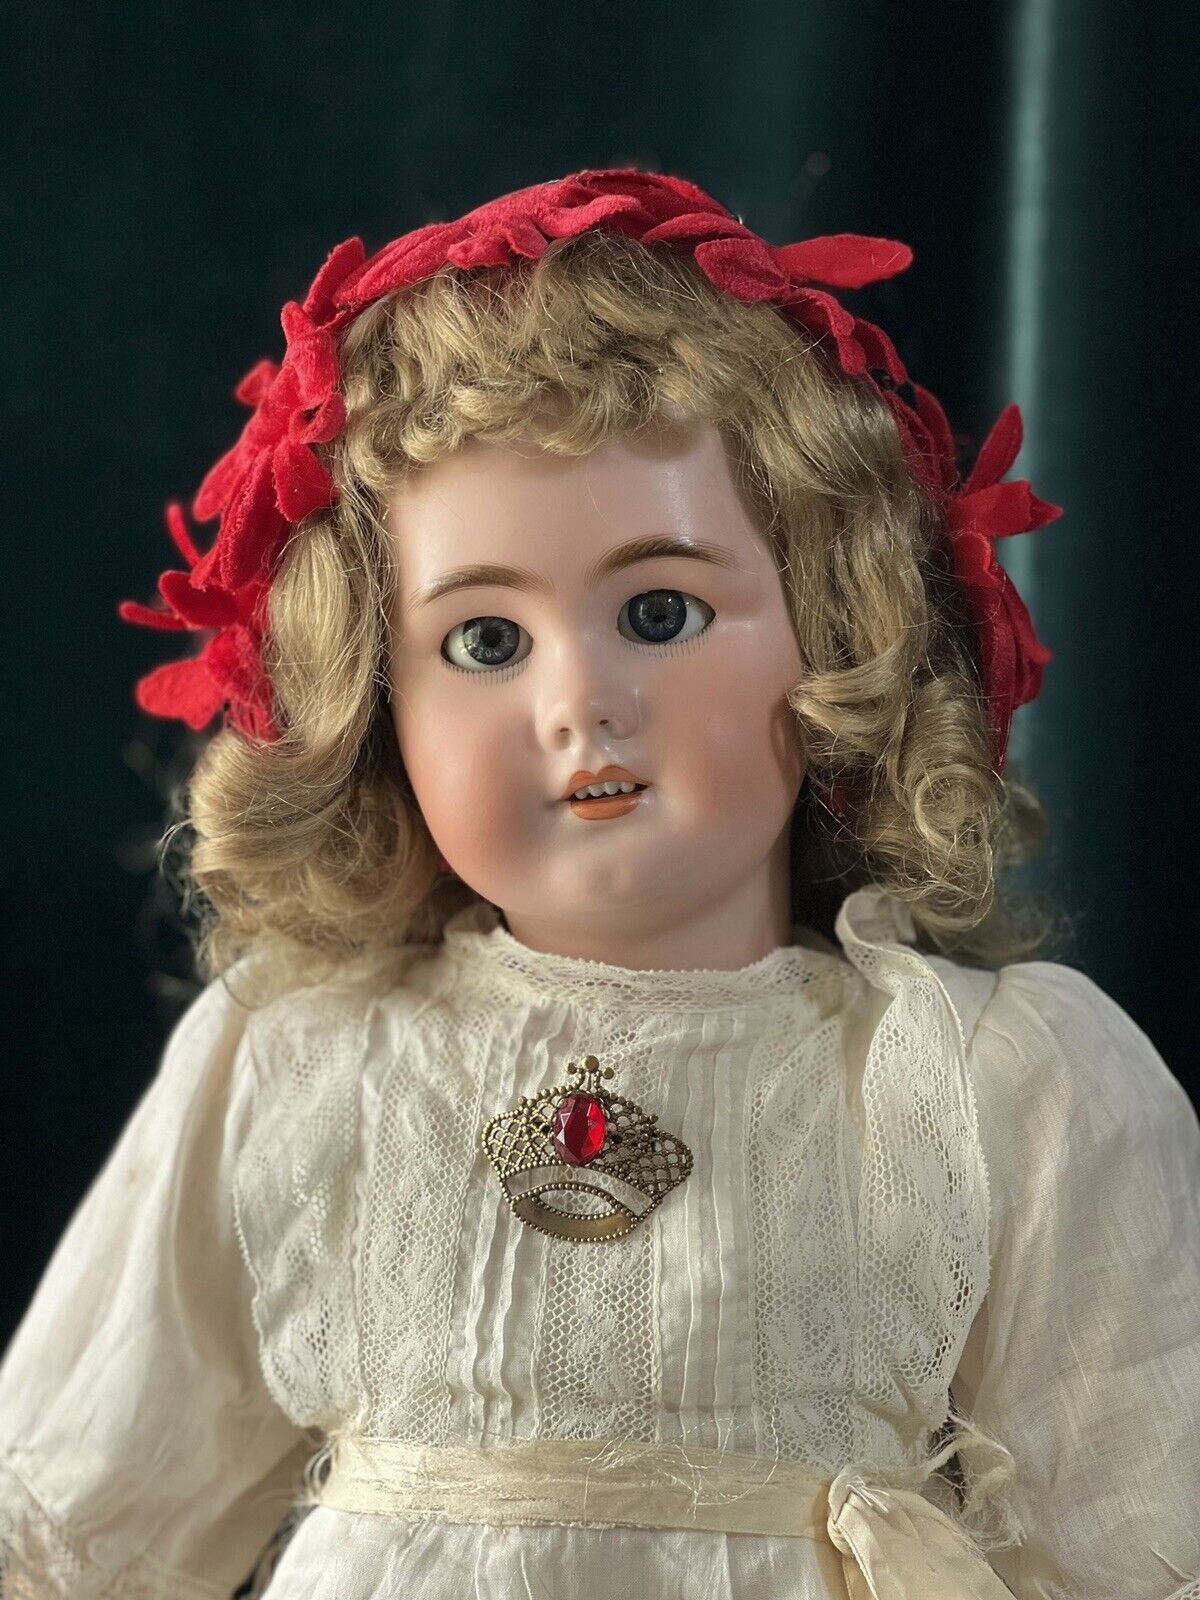 Antique French BEBE JUMEAU 23” Bisque Doll size 11 Voice Box